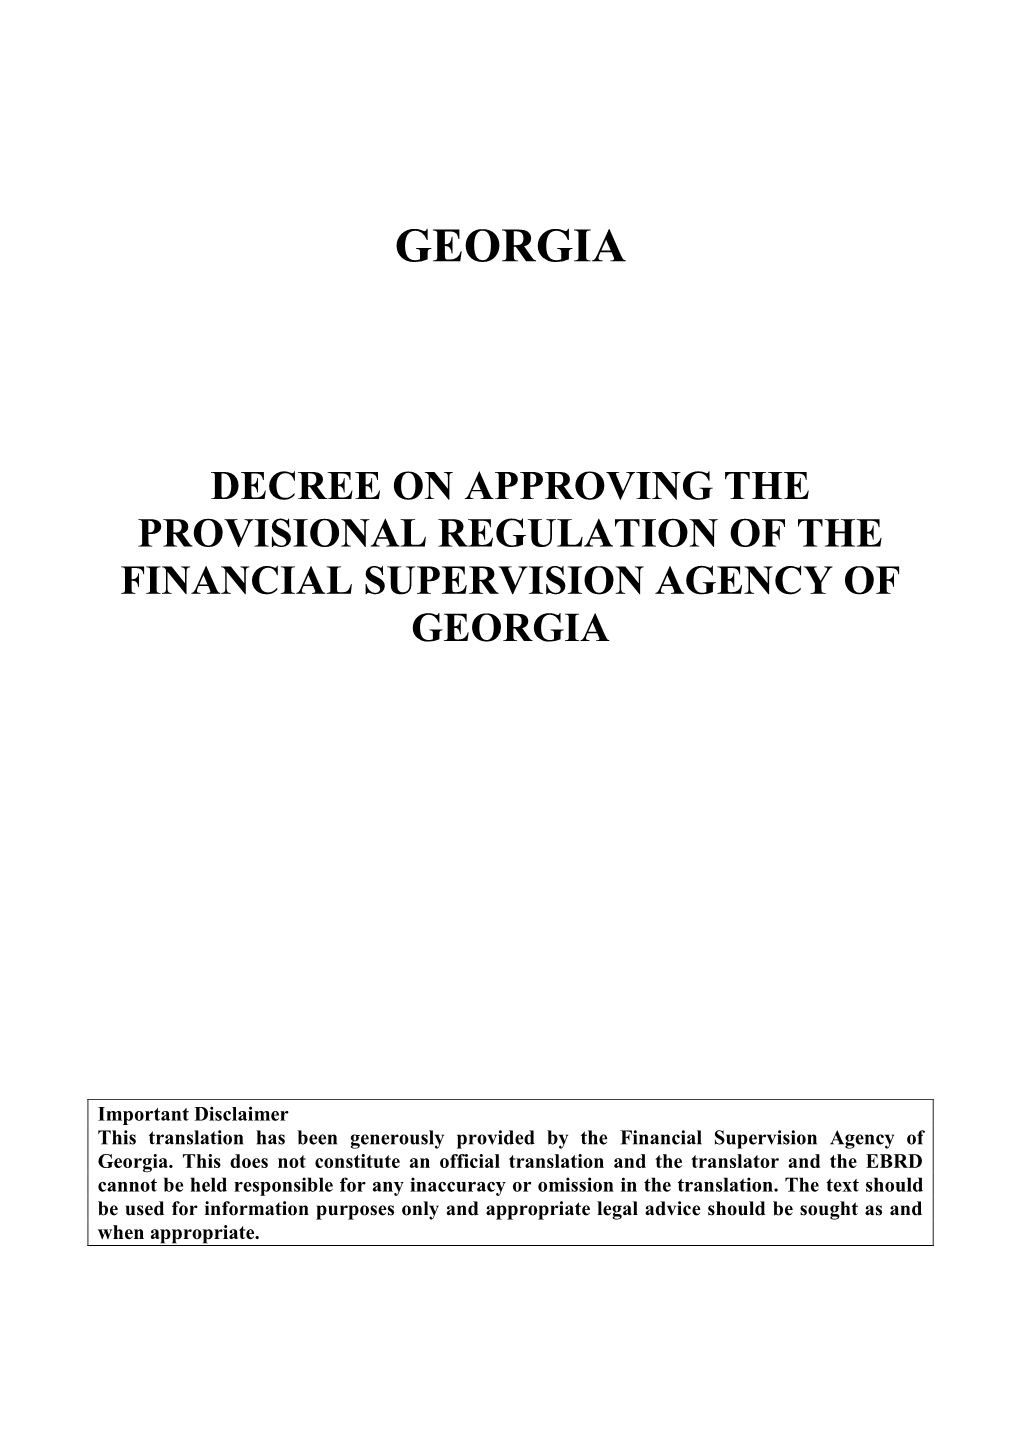 Decree on Approving the Provisional Regulation of the Financial Supervision Agency of Georgia